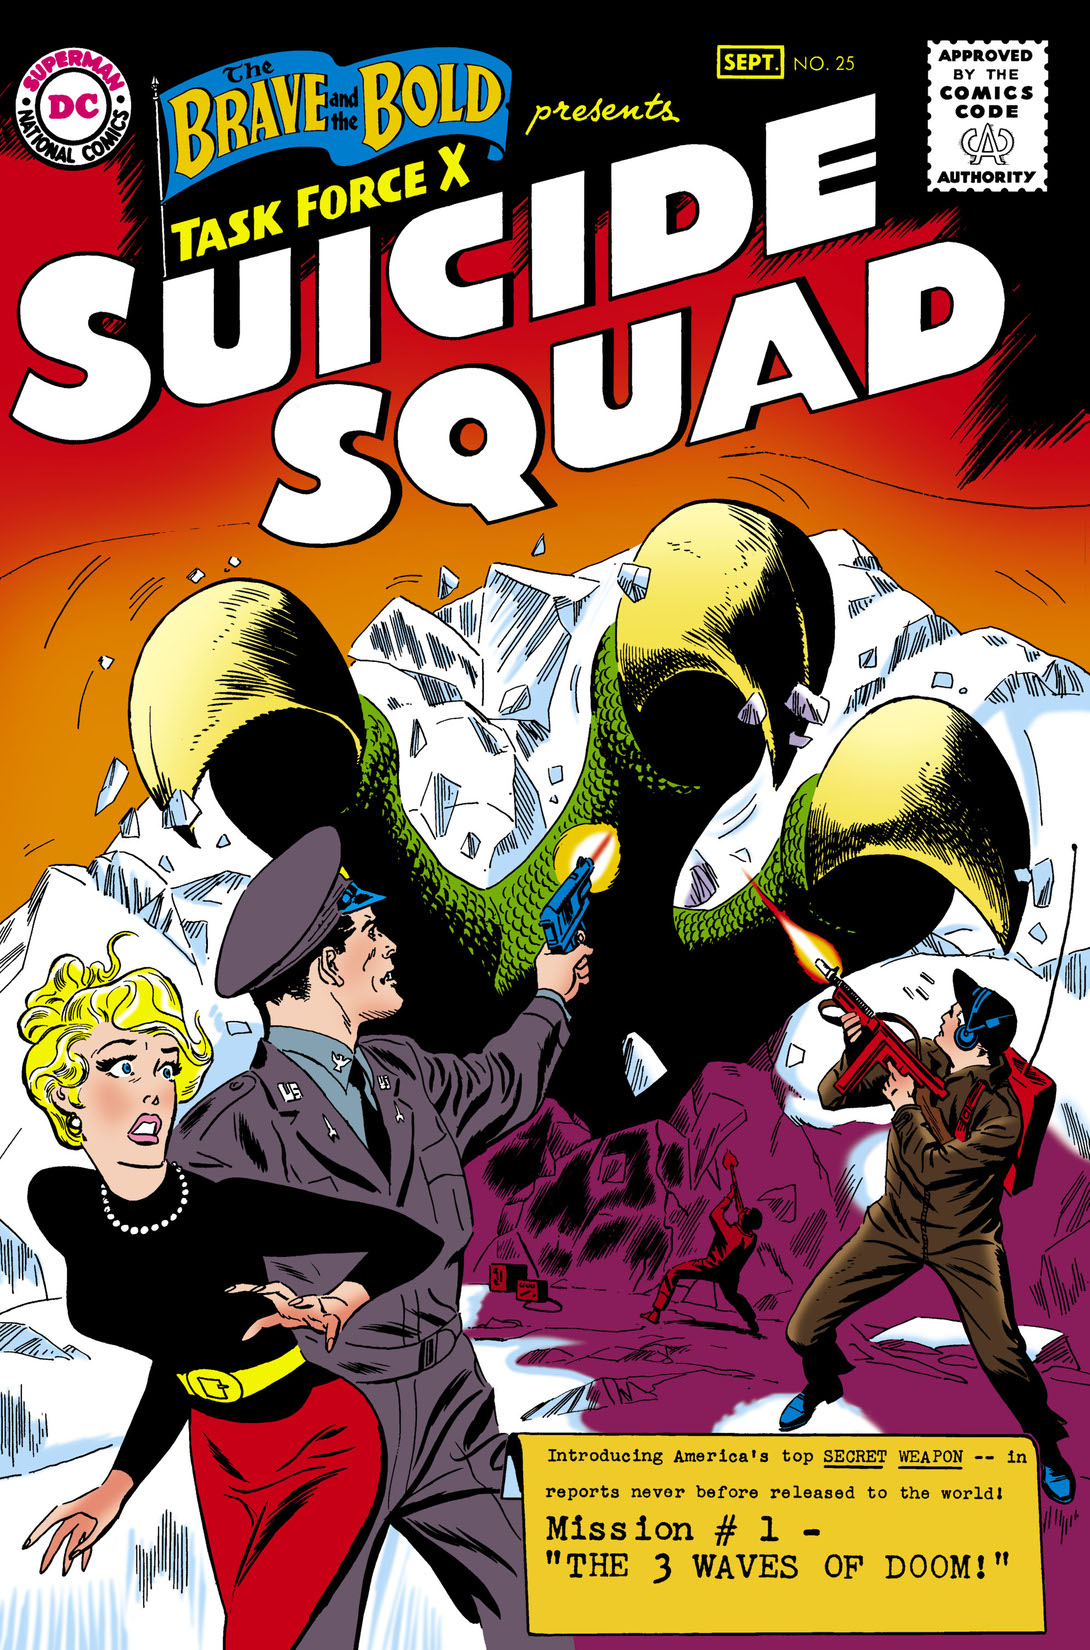 The Brave and the Bold (1955-) #25 preview images